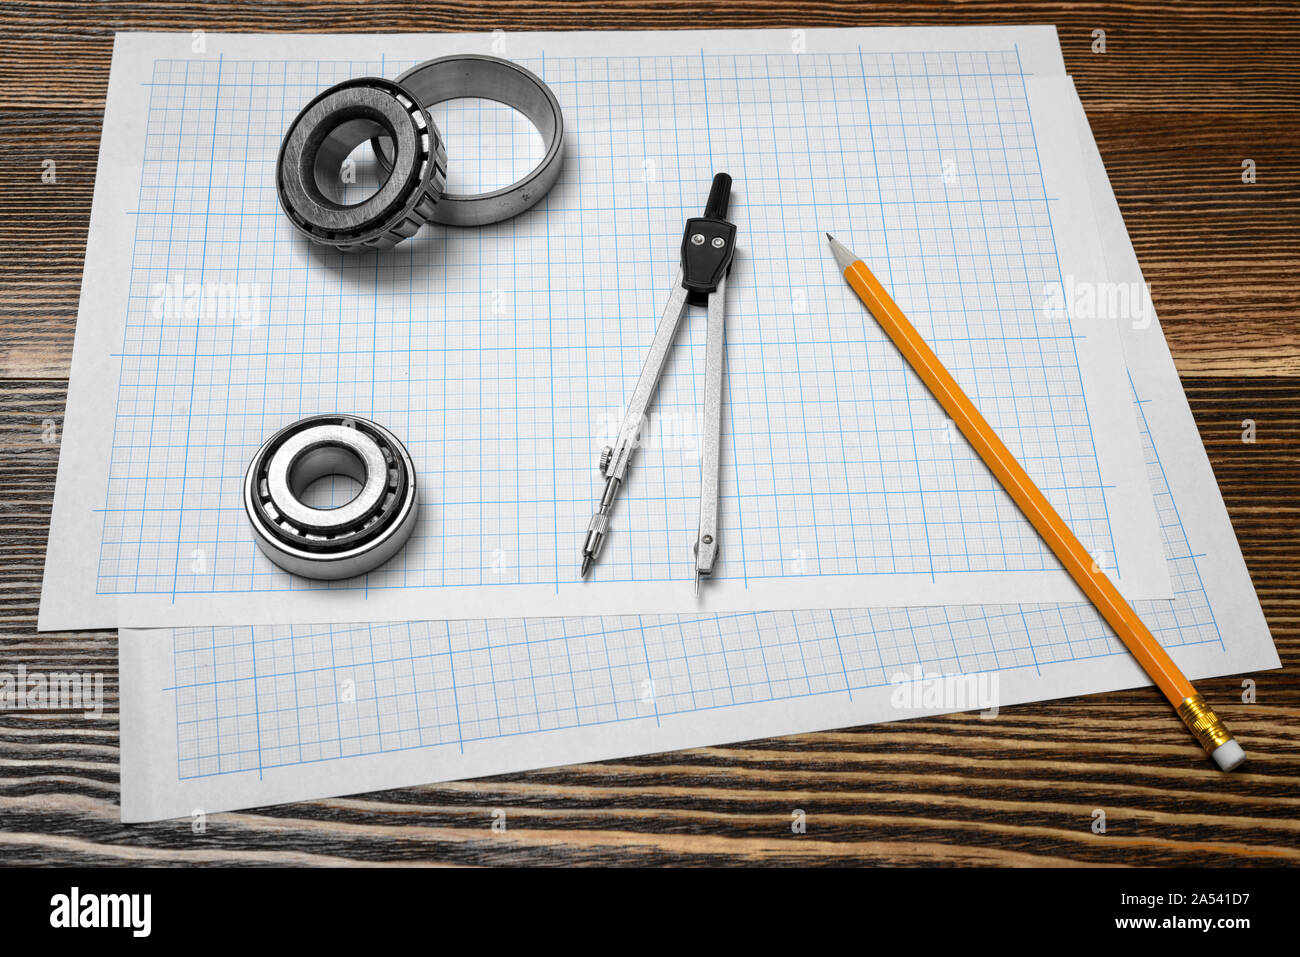 A vernier caliper holding a bearing, a pencil and a pair of compasses lying over drafting paper on wood background. Stock Photo